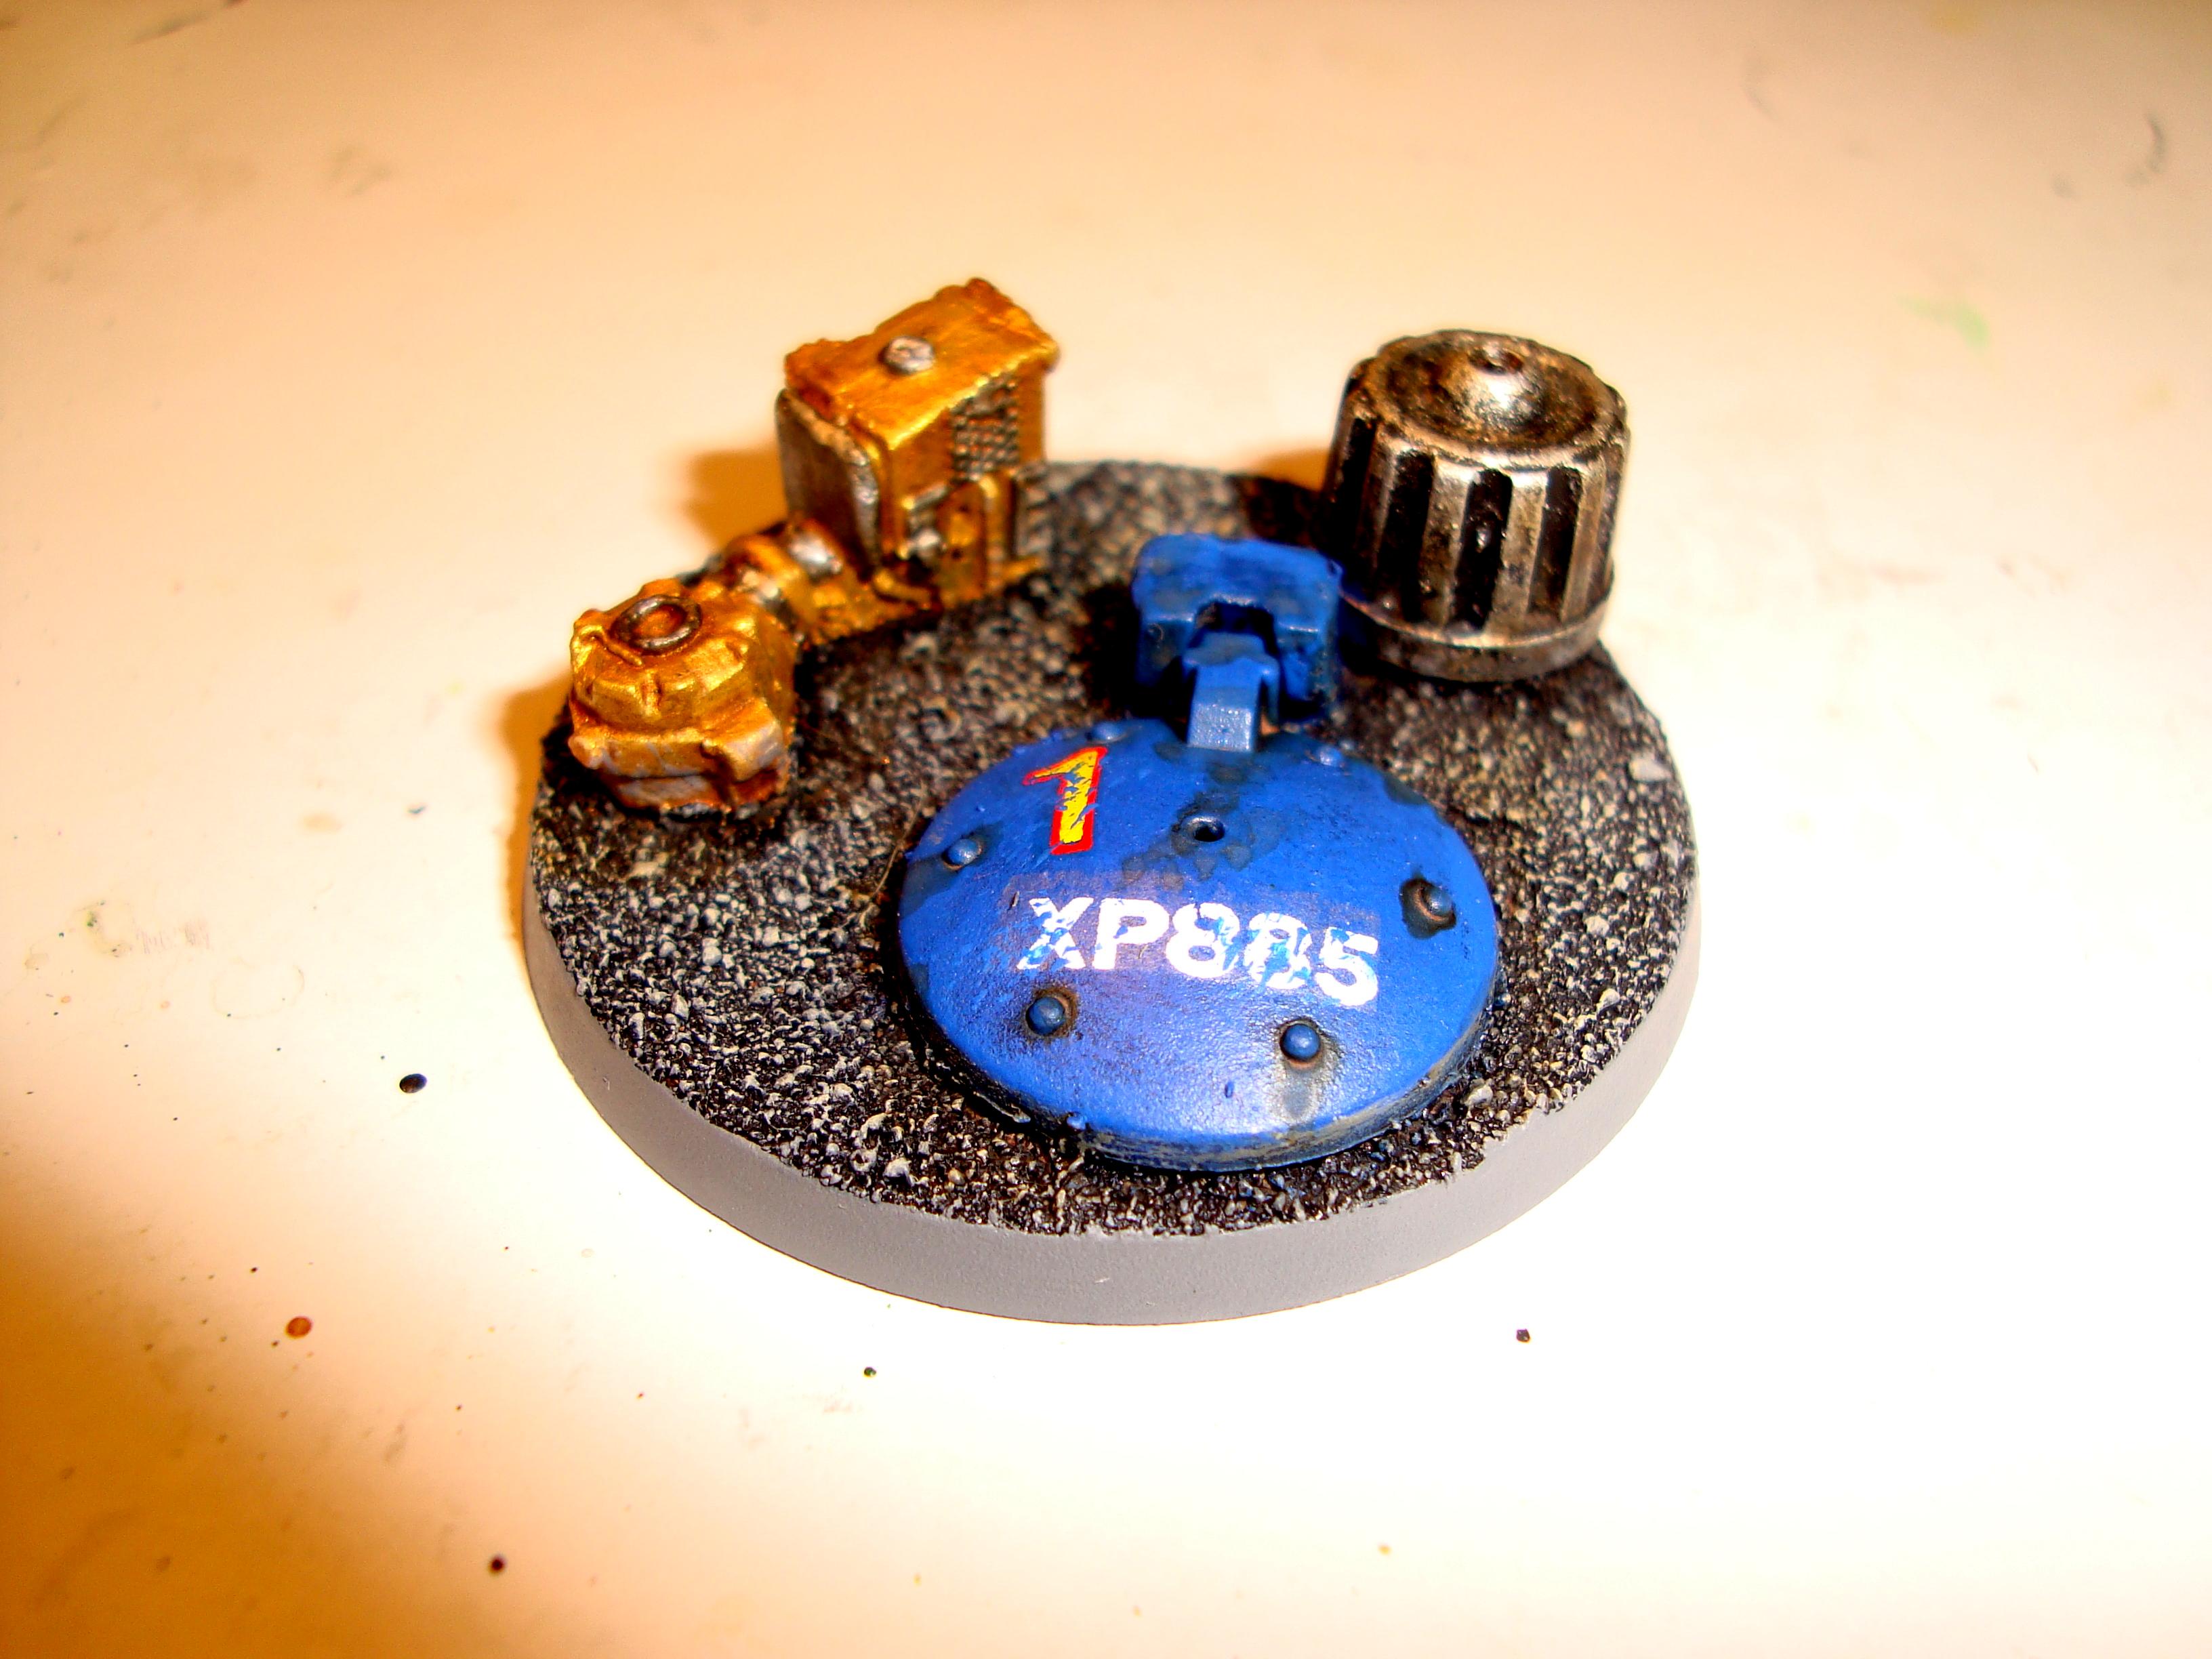 Objective Marker, Objective markers